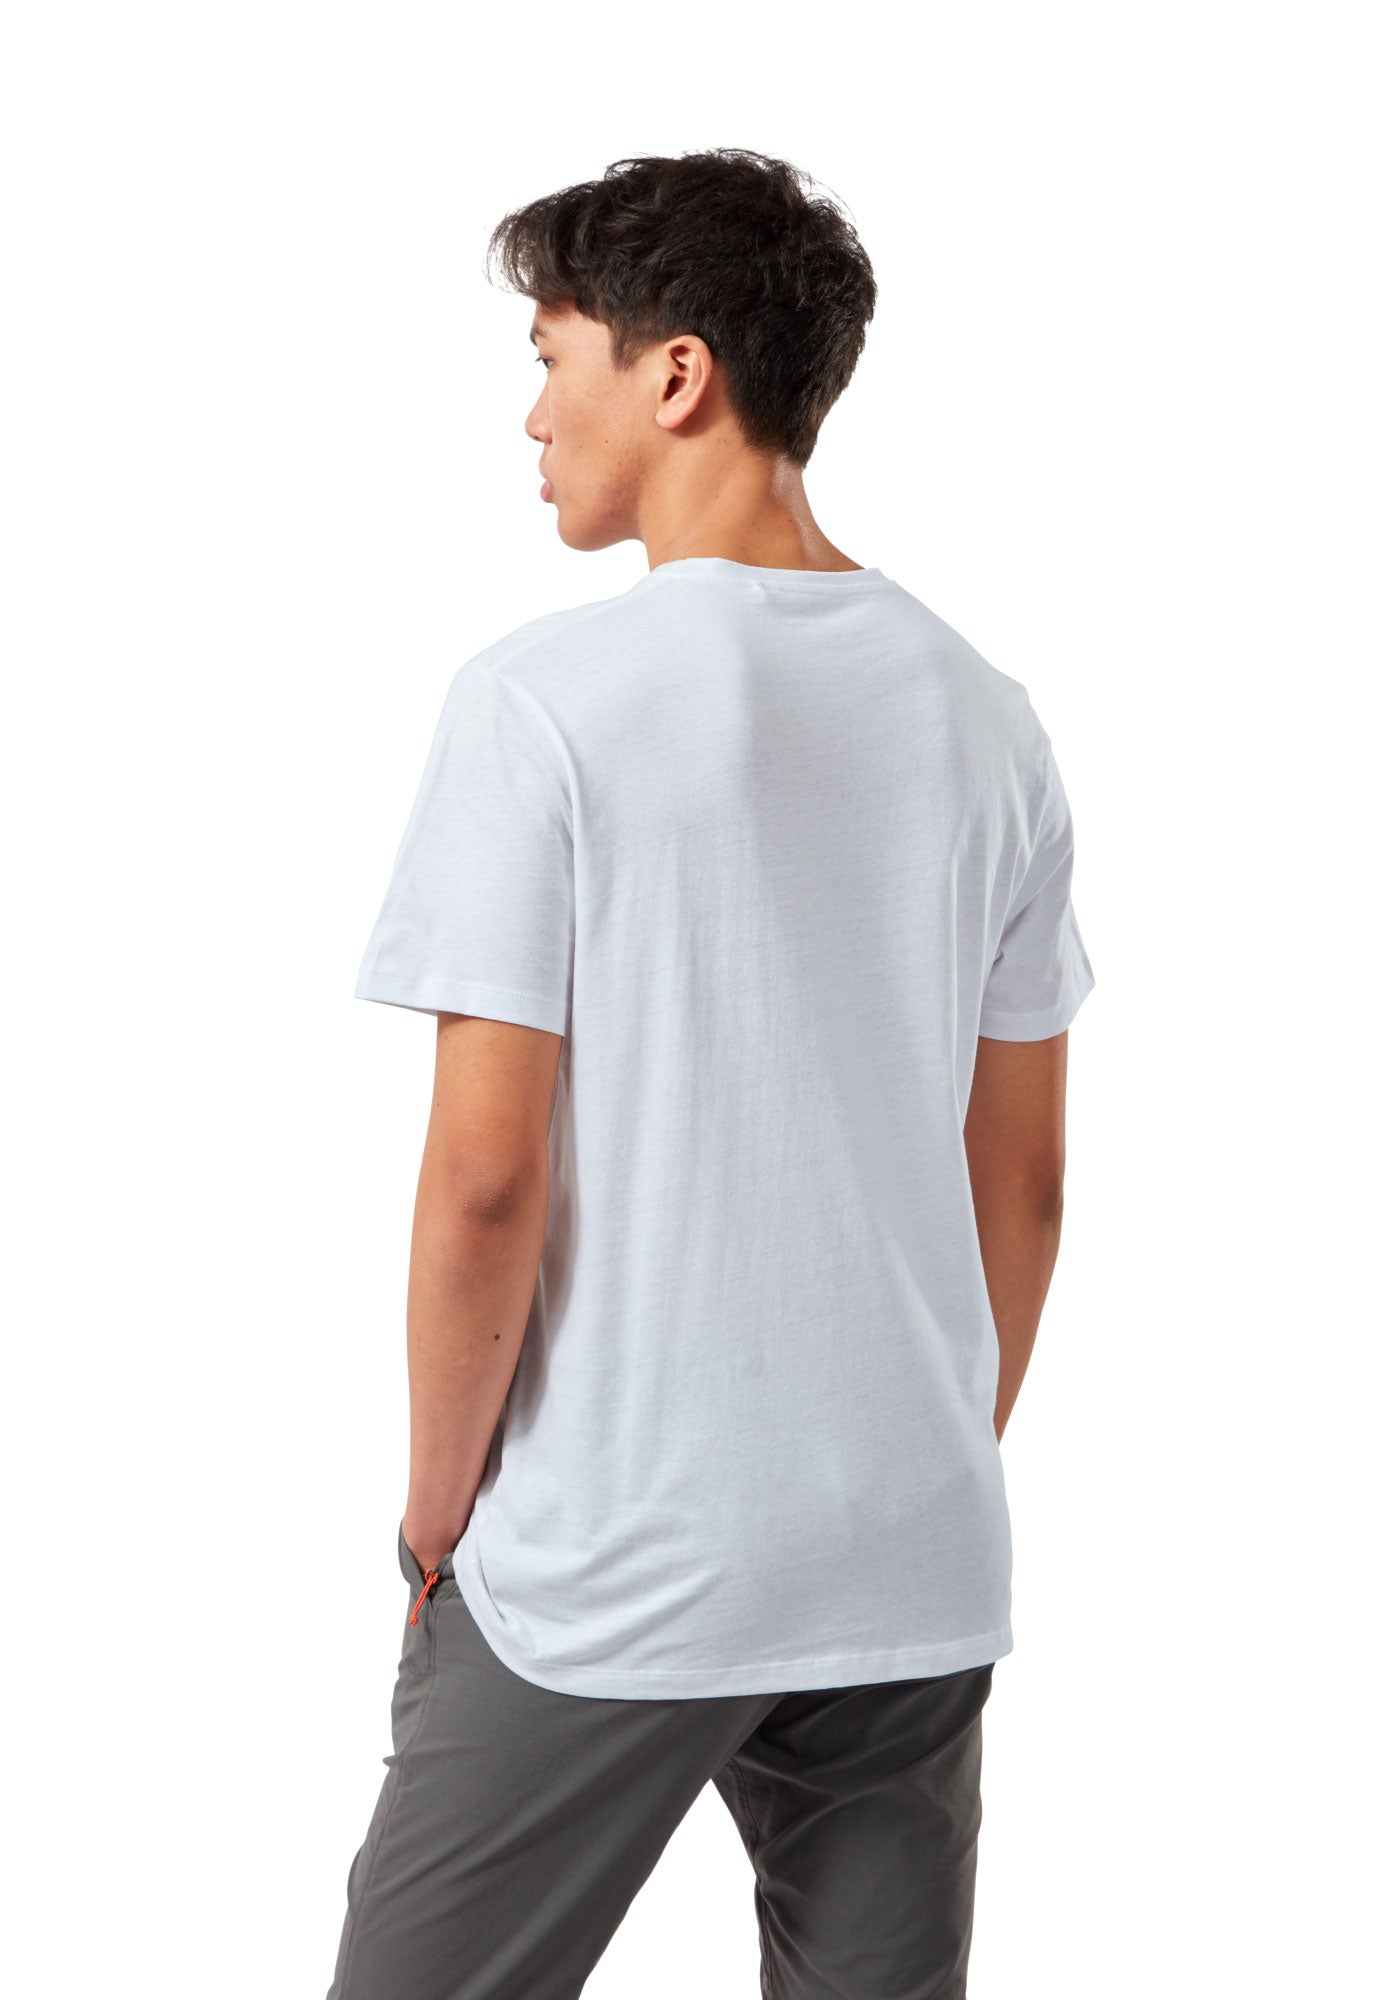 Back white Mightie Short Sleeve Cotton T-Shirt by Craghoppers 